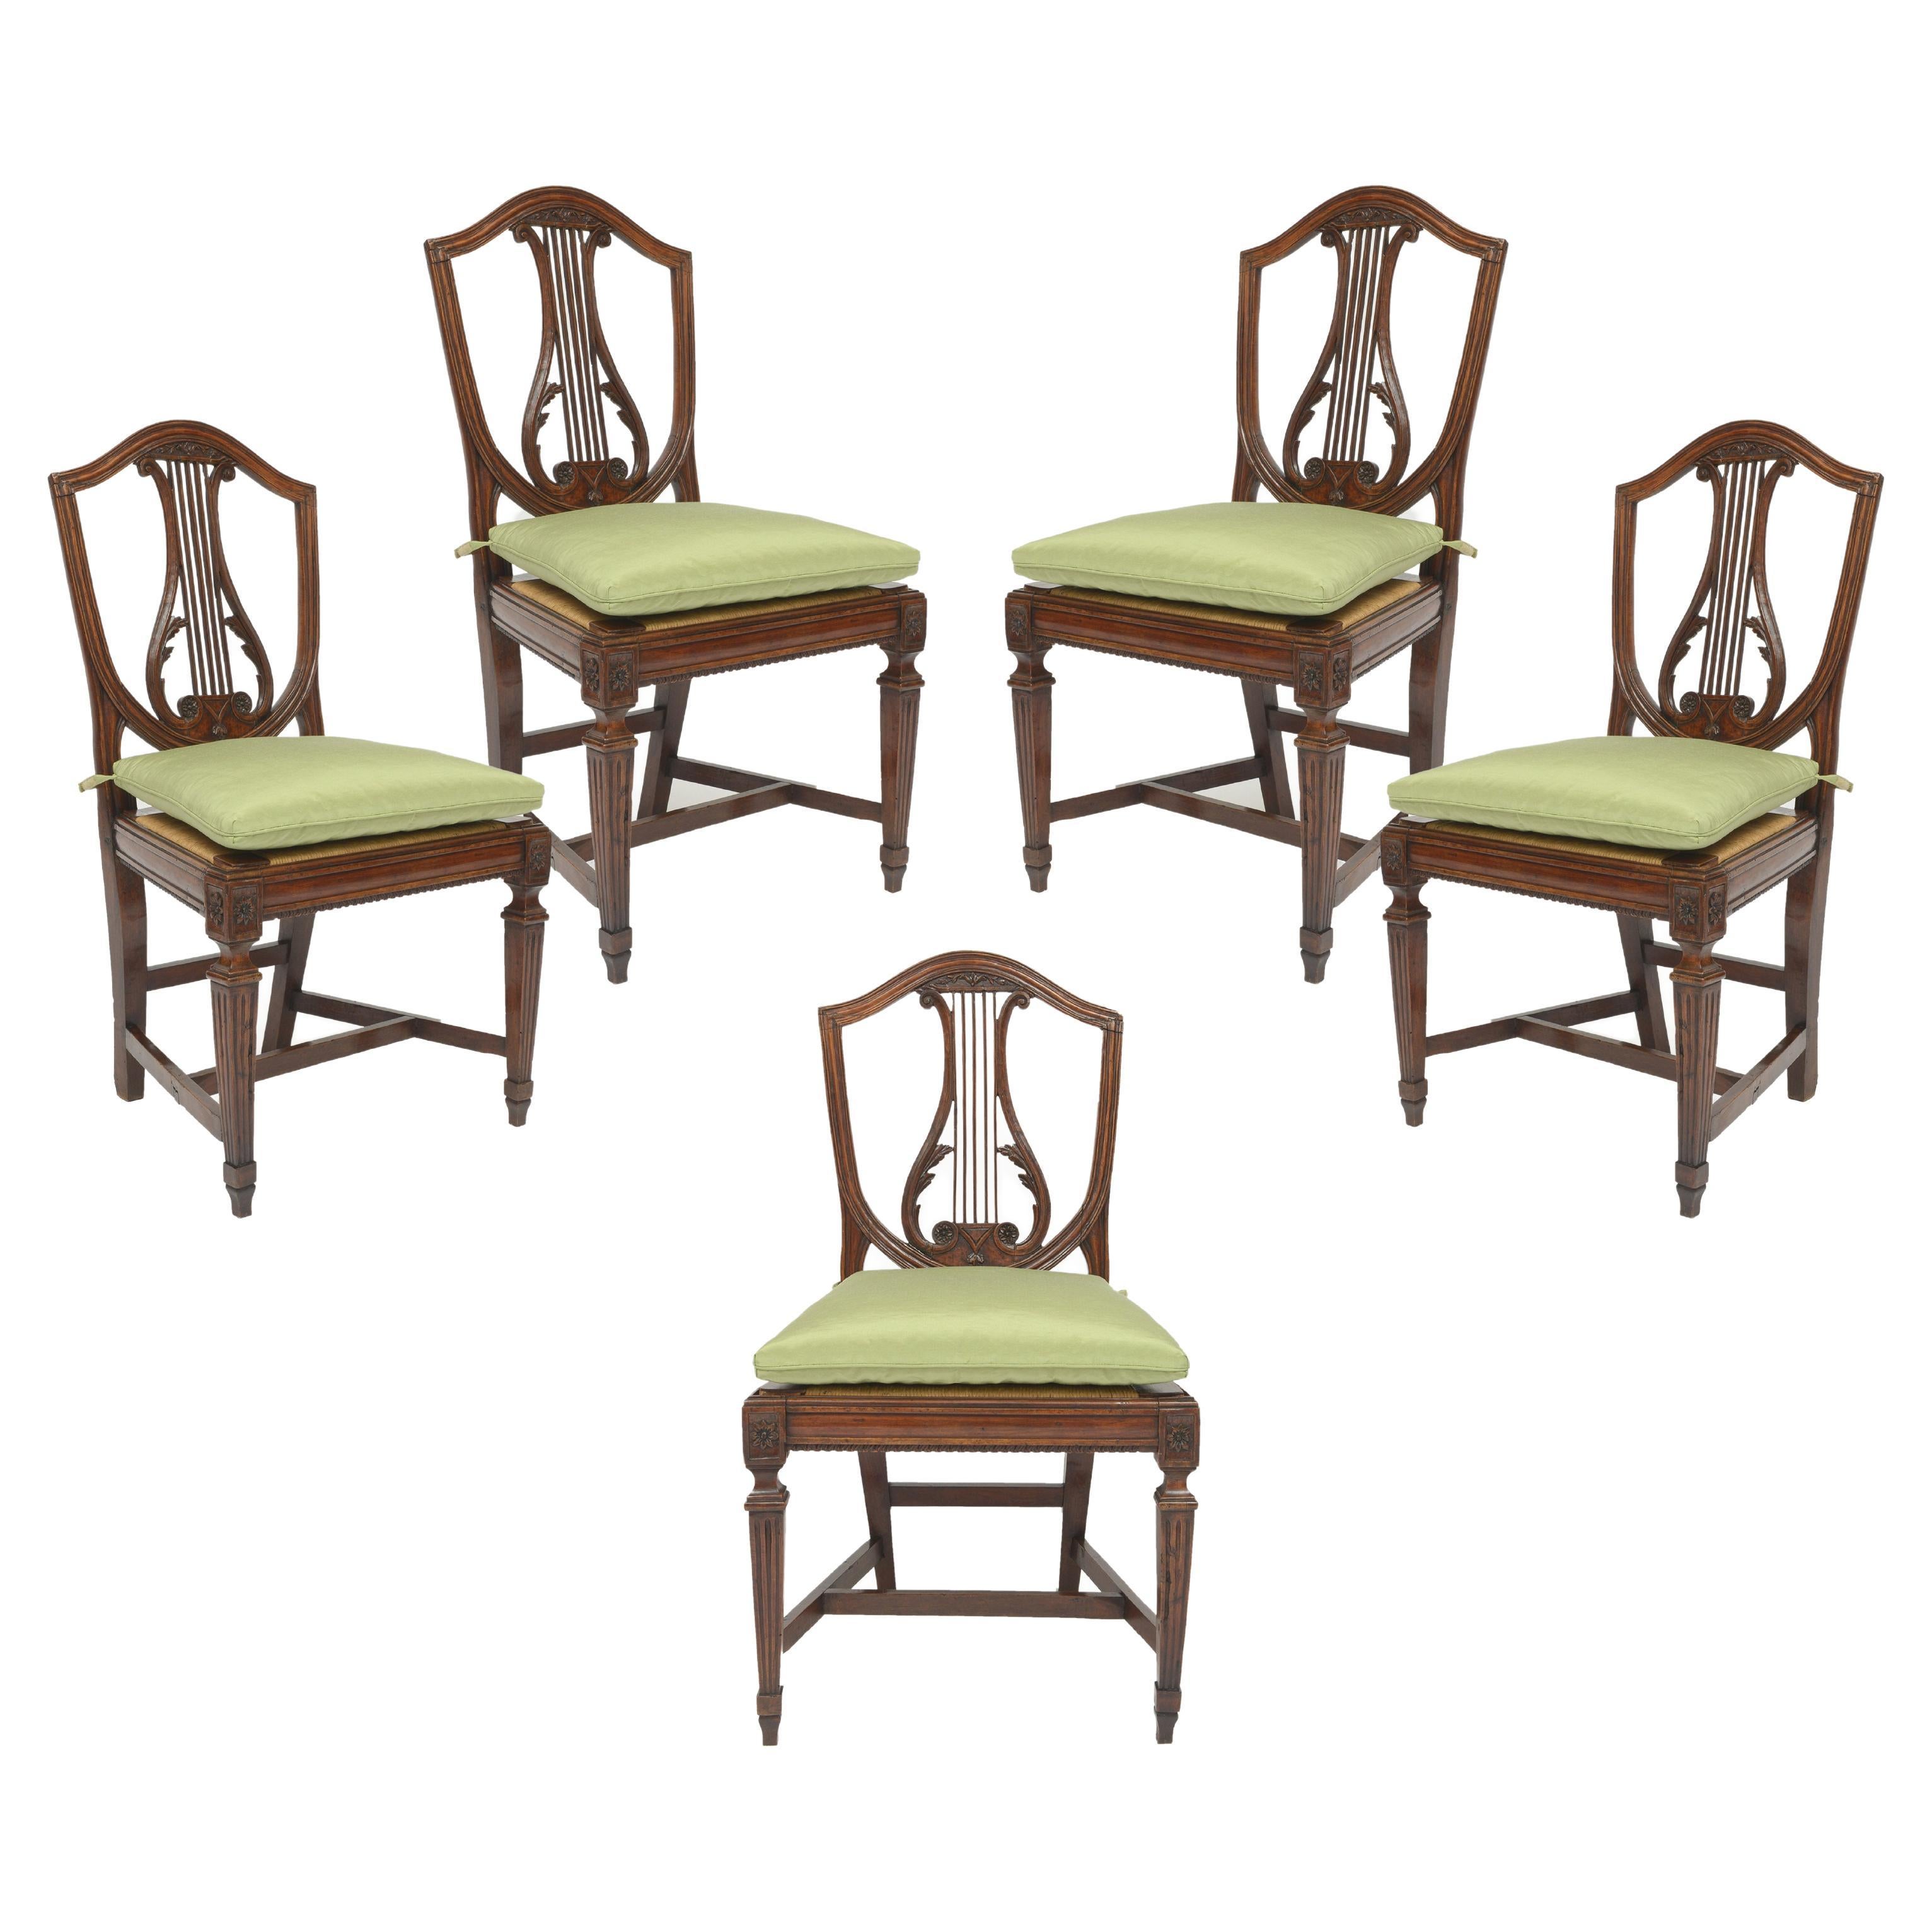 Early 19th Century Set of 5 Italian Walnut Lyre-Back Chairs For Sale